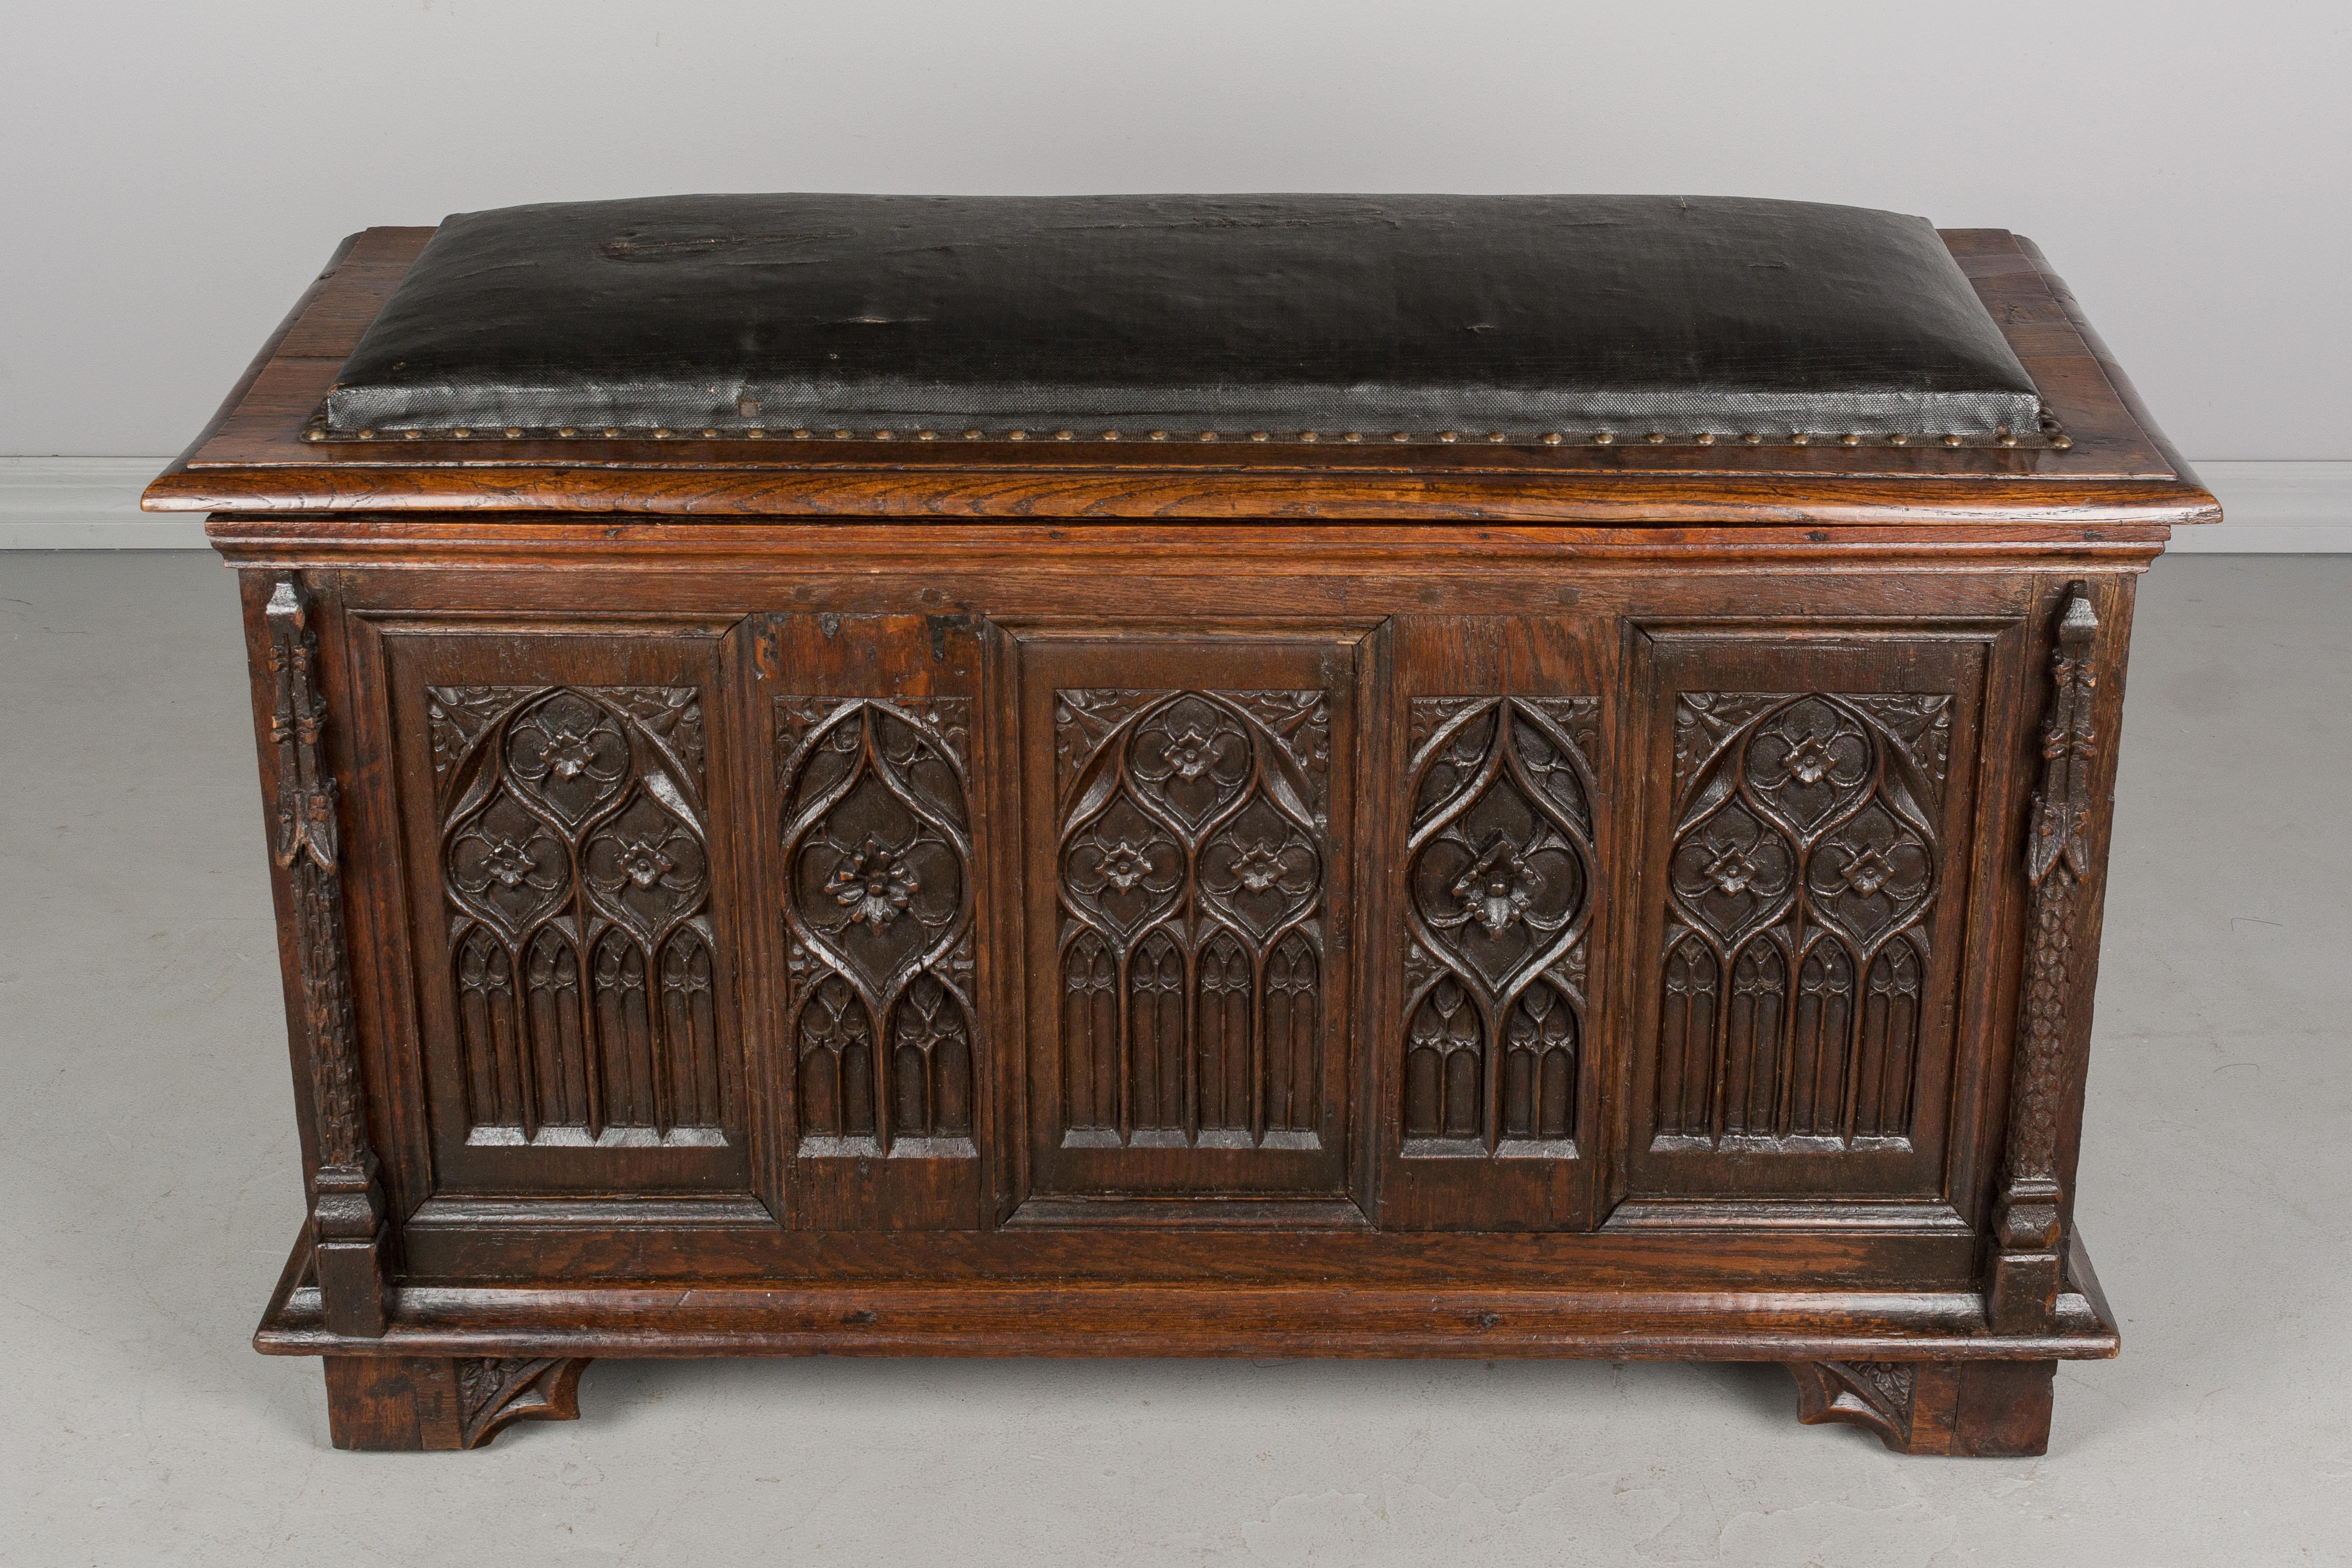 19th Century Gothic Revival Blanket Chest or Bench